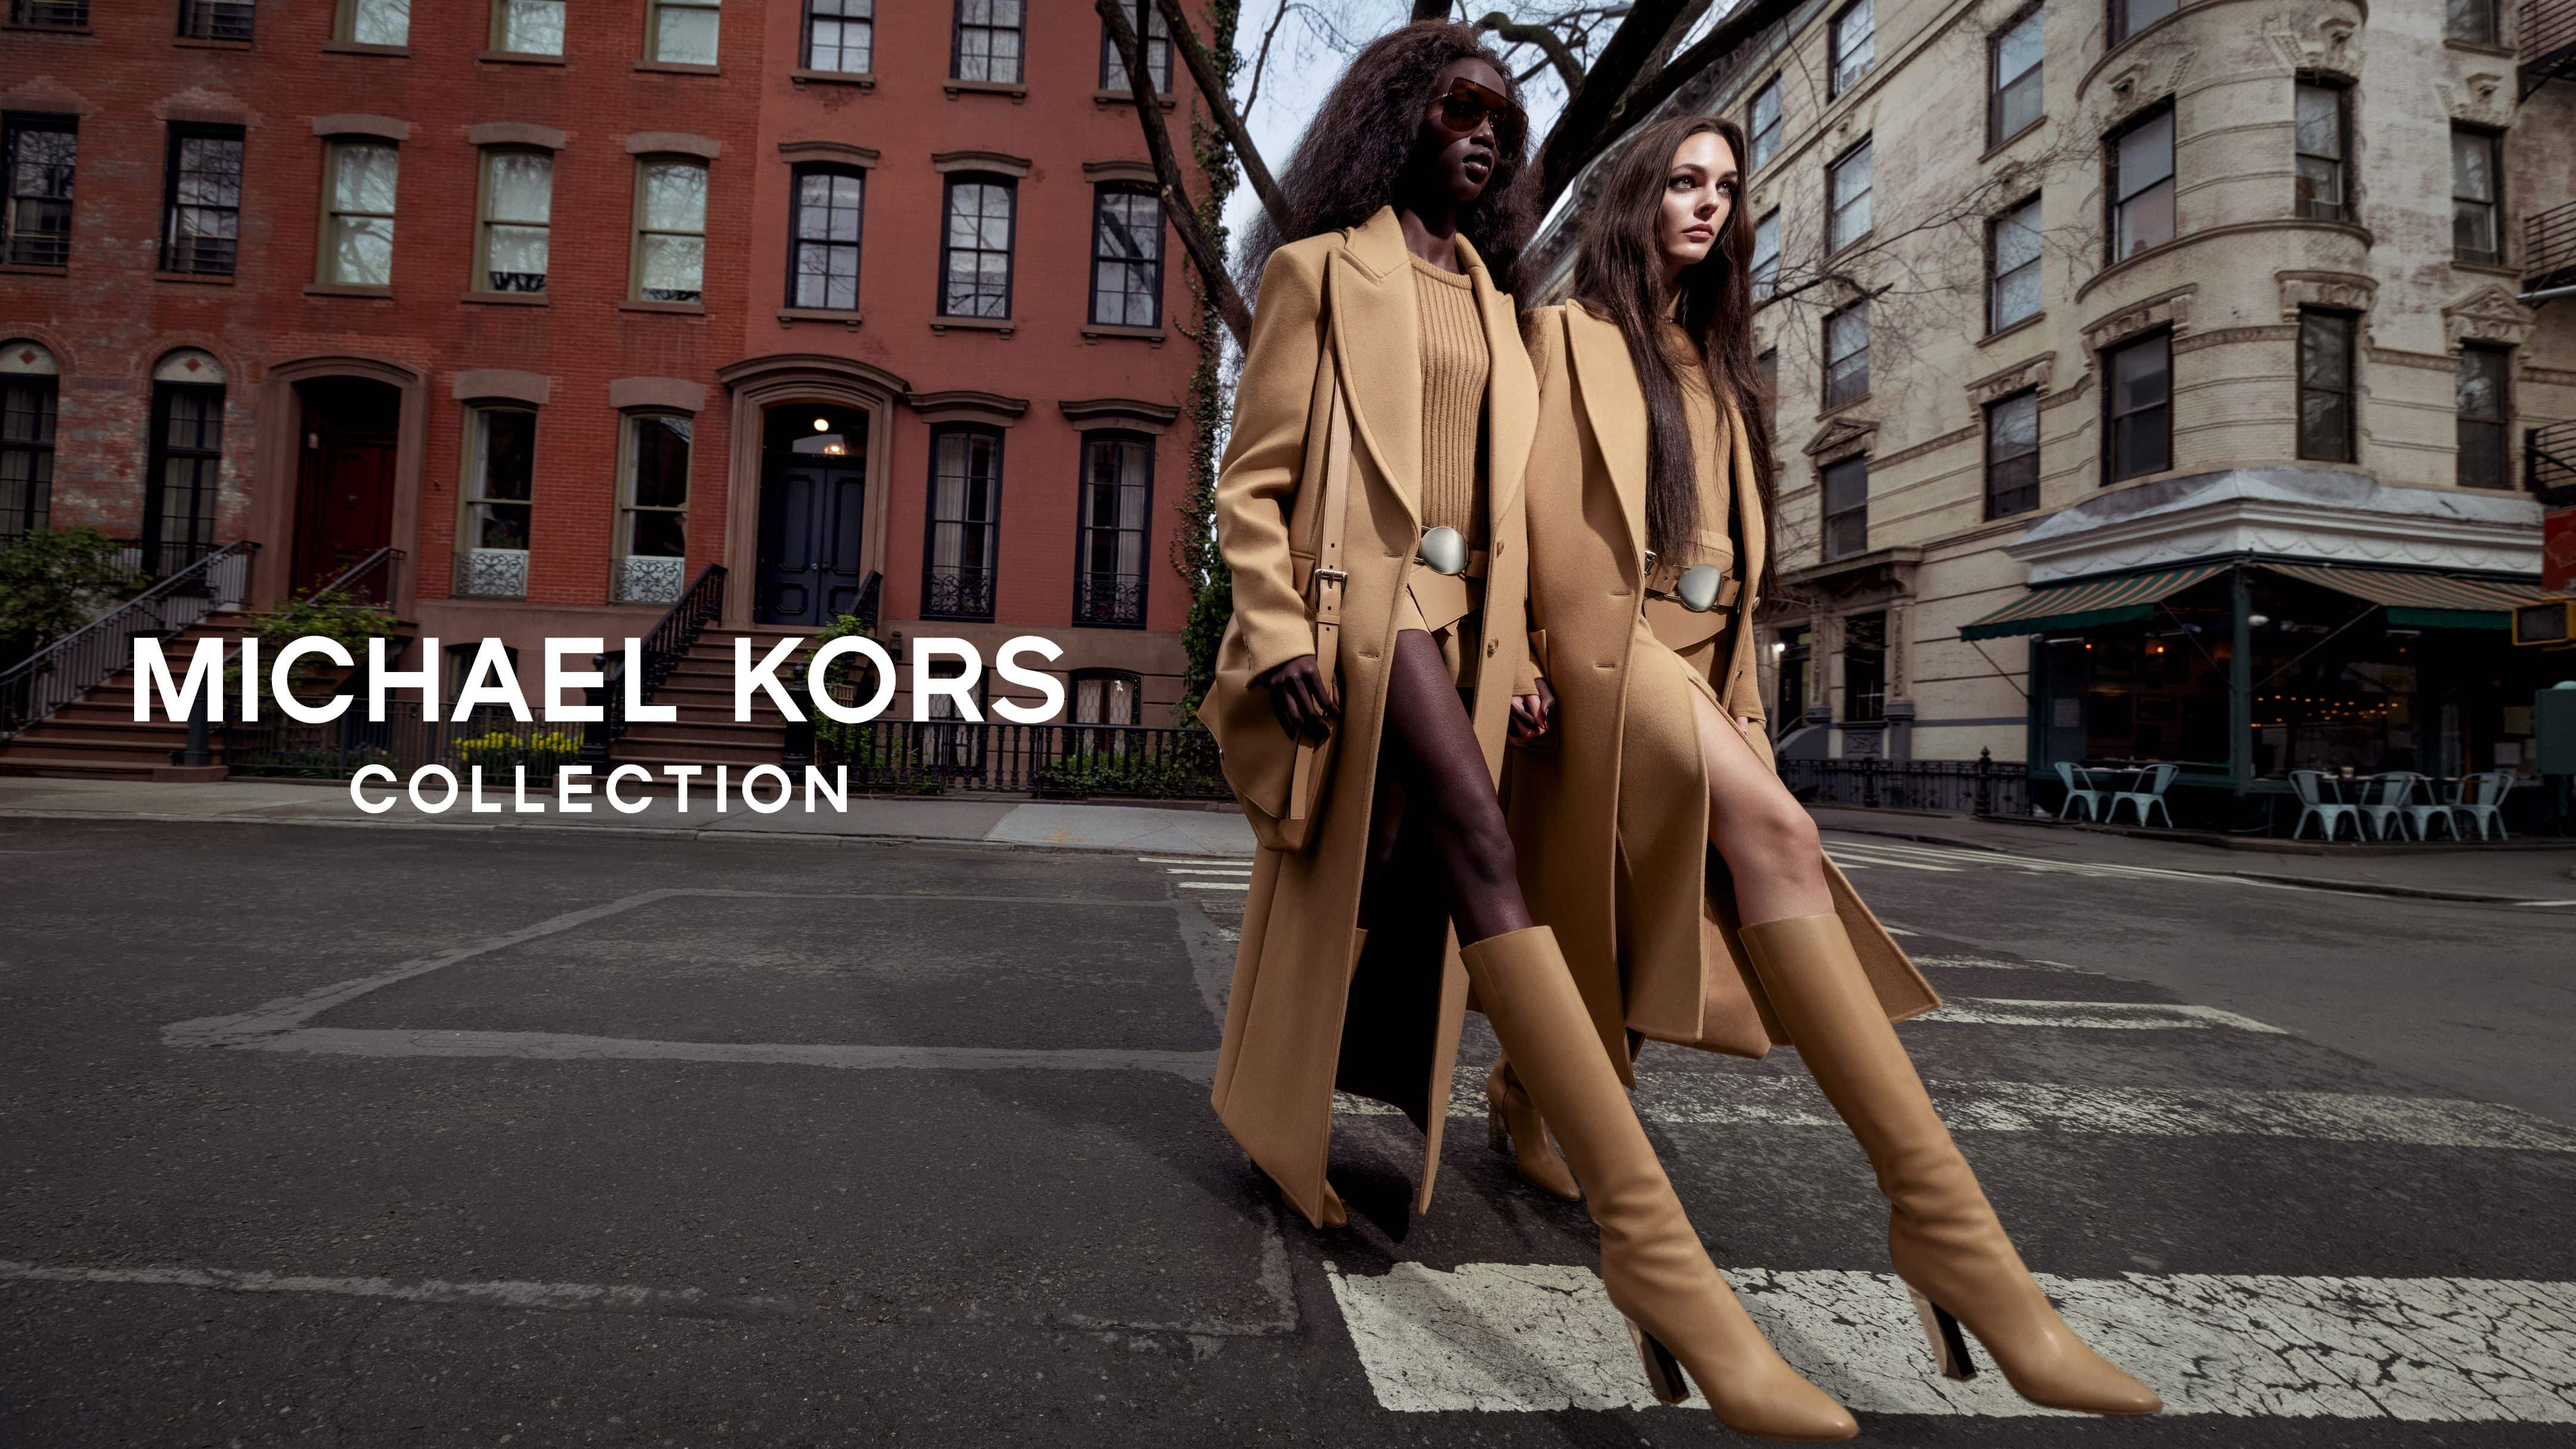 Michael Kors Malaysia opens runway-inspired store - Inside Retail Asia